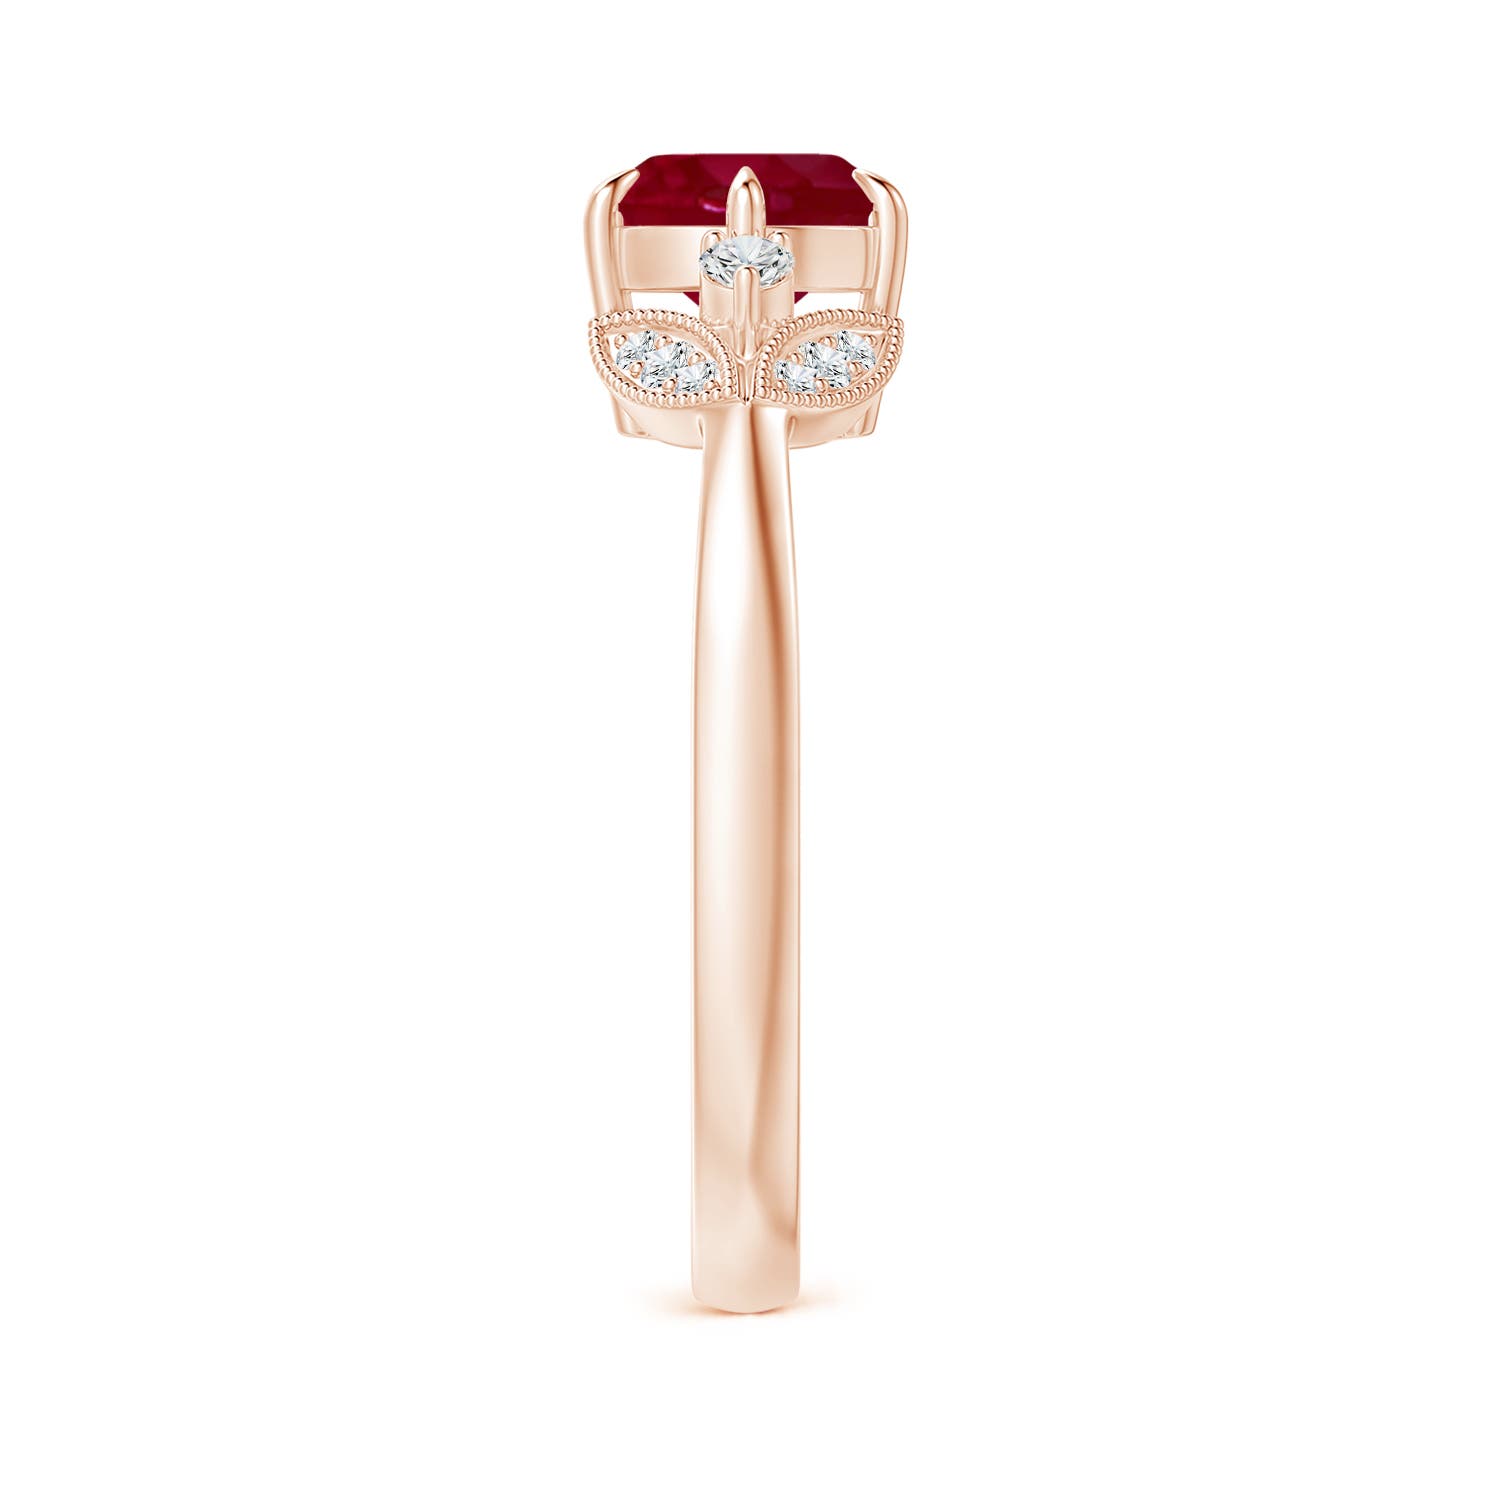 AA - Ruby / 1.64 CT / 14 KT Rose Gold